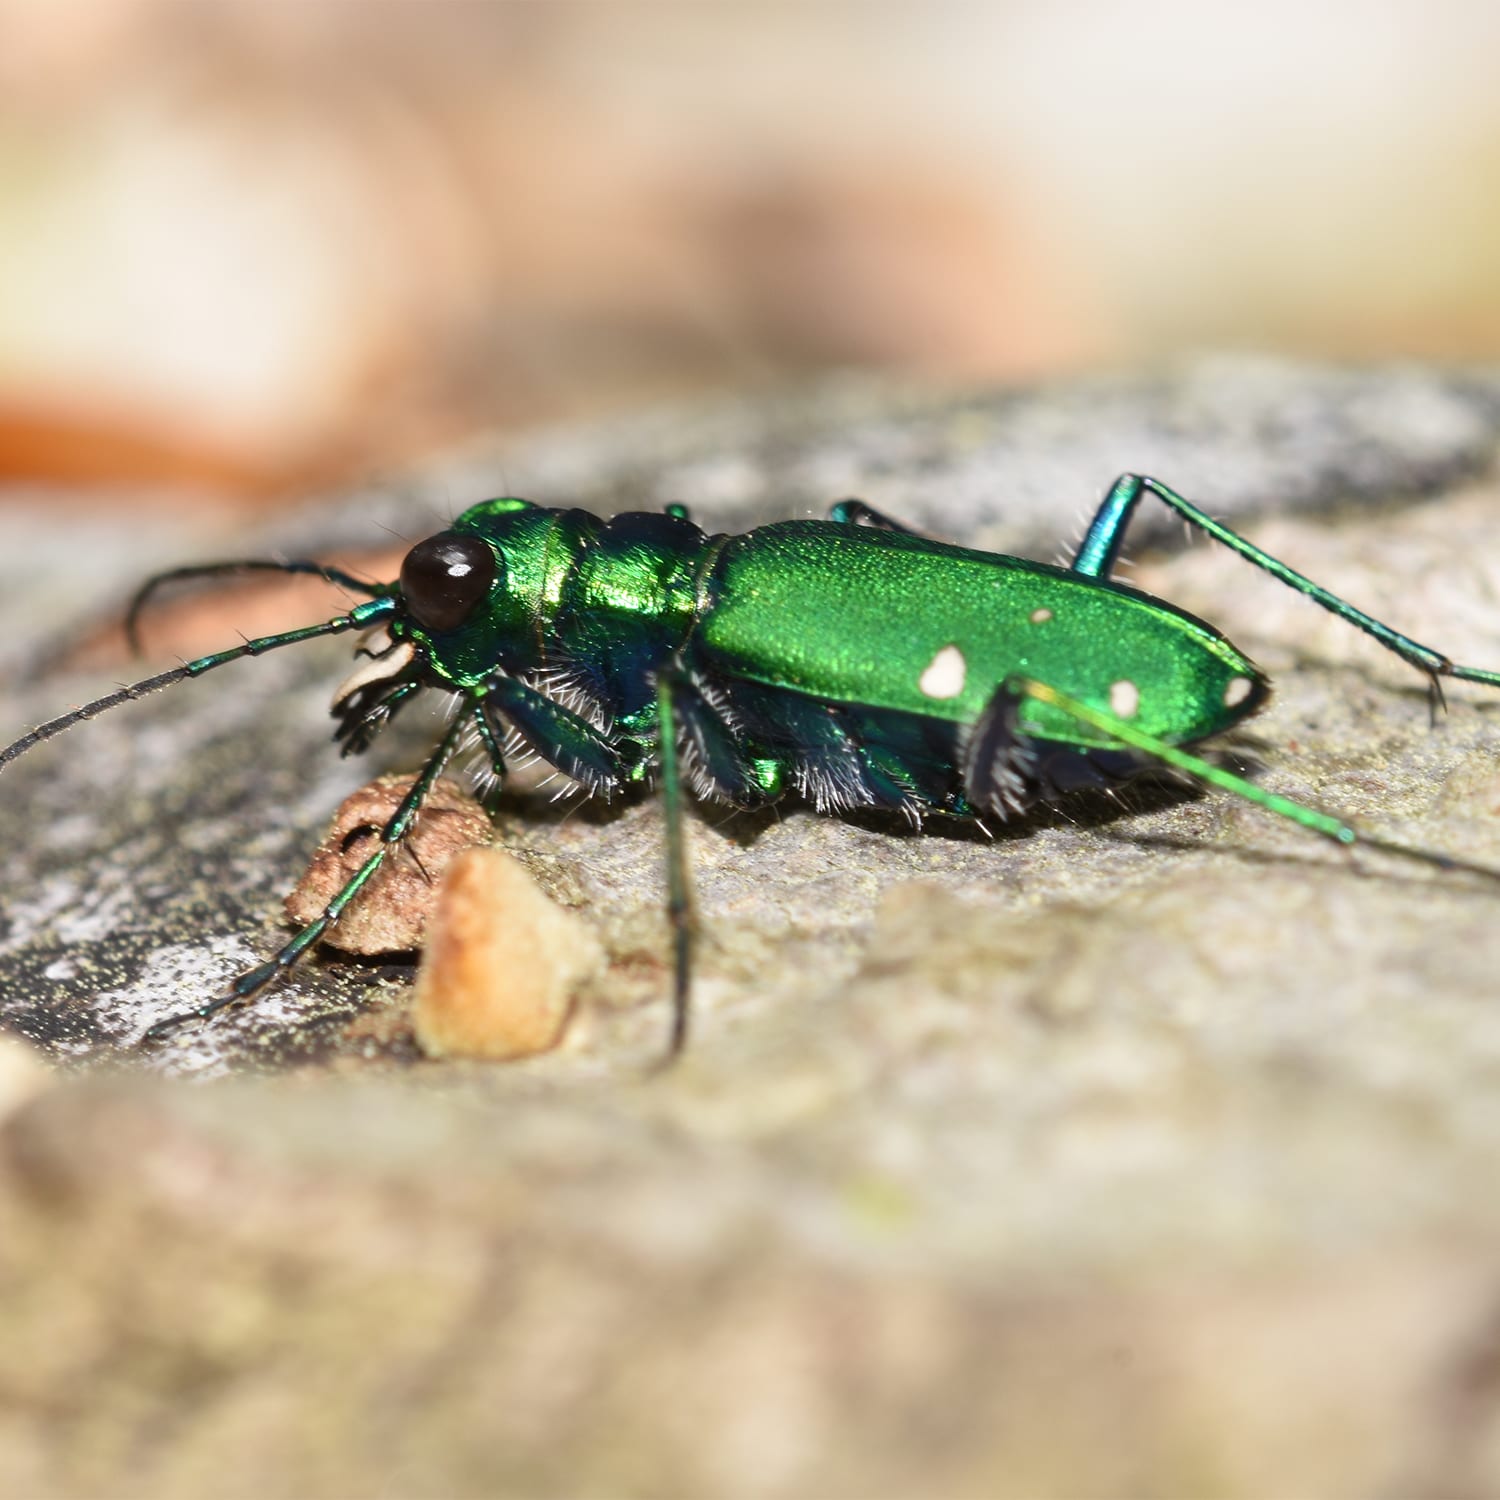 The Side View of the Six Spotted Tiger Beetle